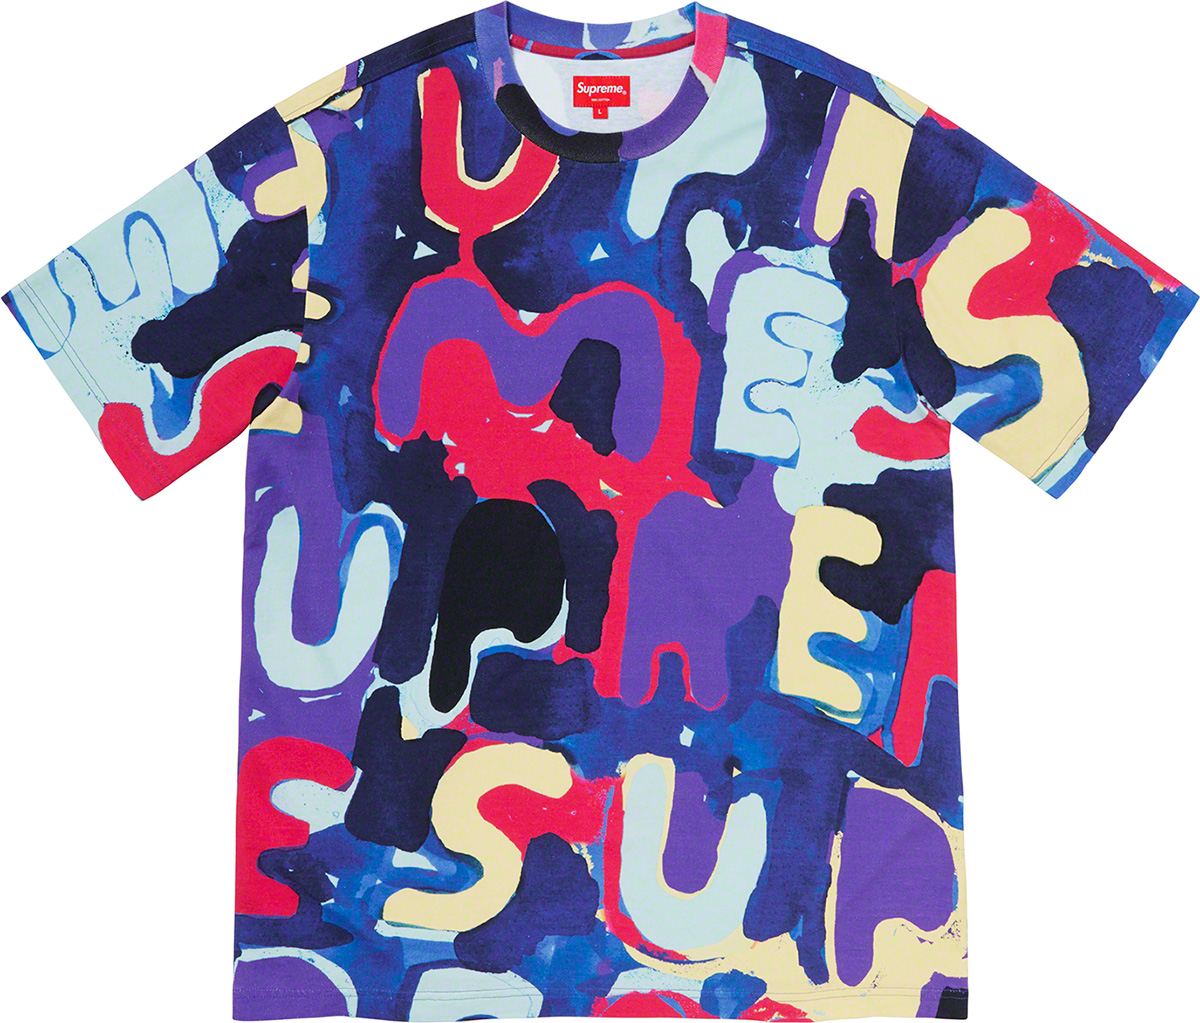 Painted Logo S S Top - spring summer 2020 - Supreme